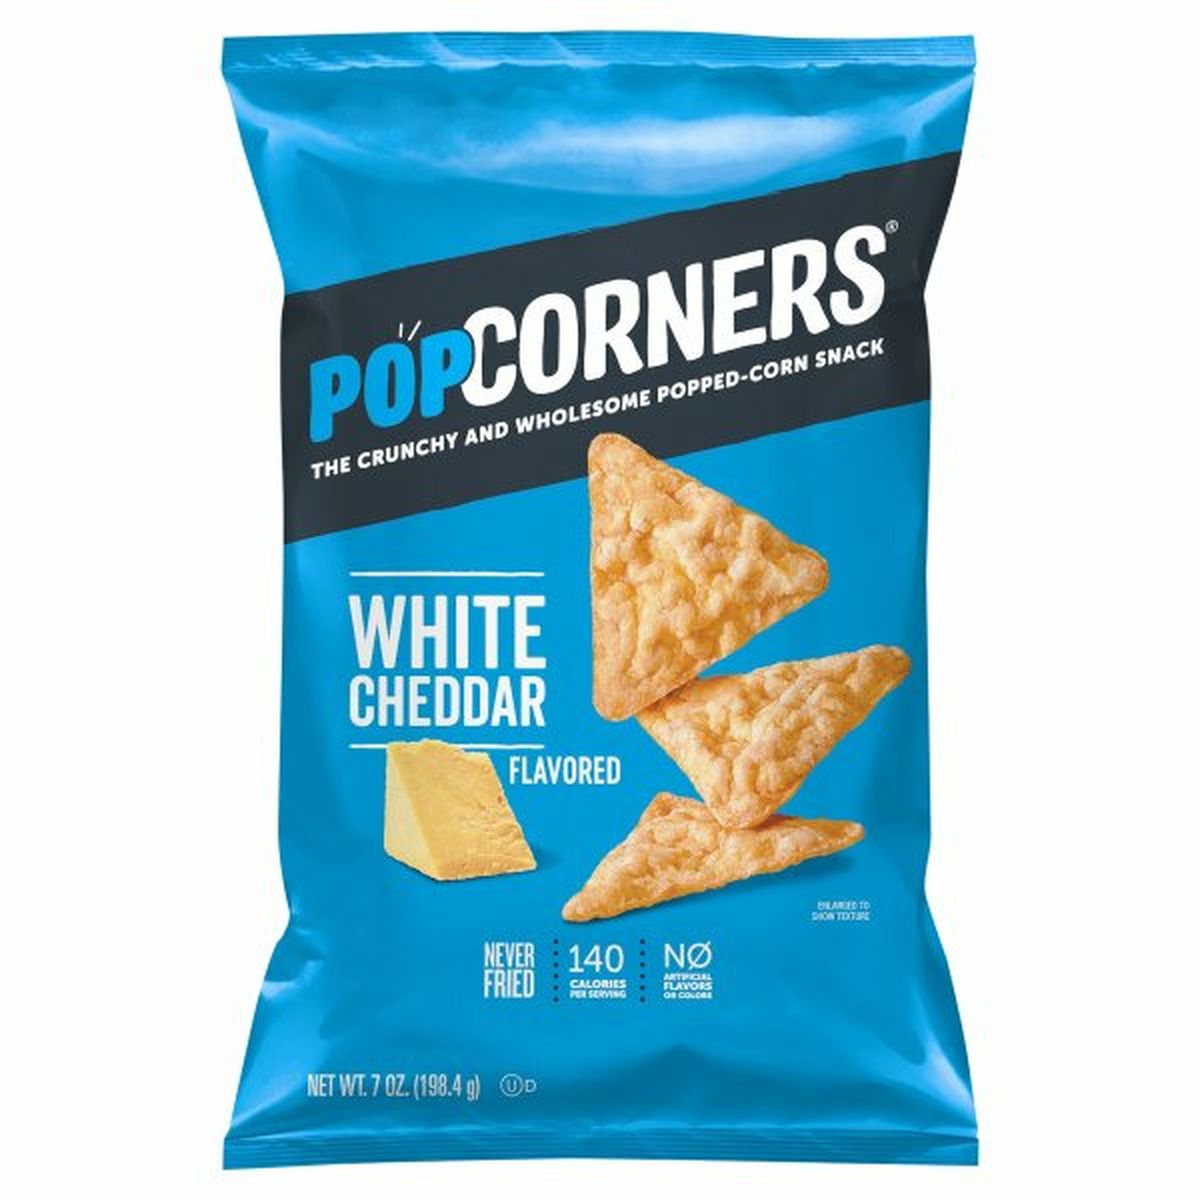 Calories in PopCorners Popped-Corn Snack, White Cheddar Flavored